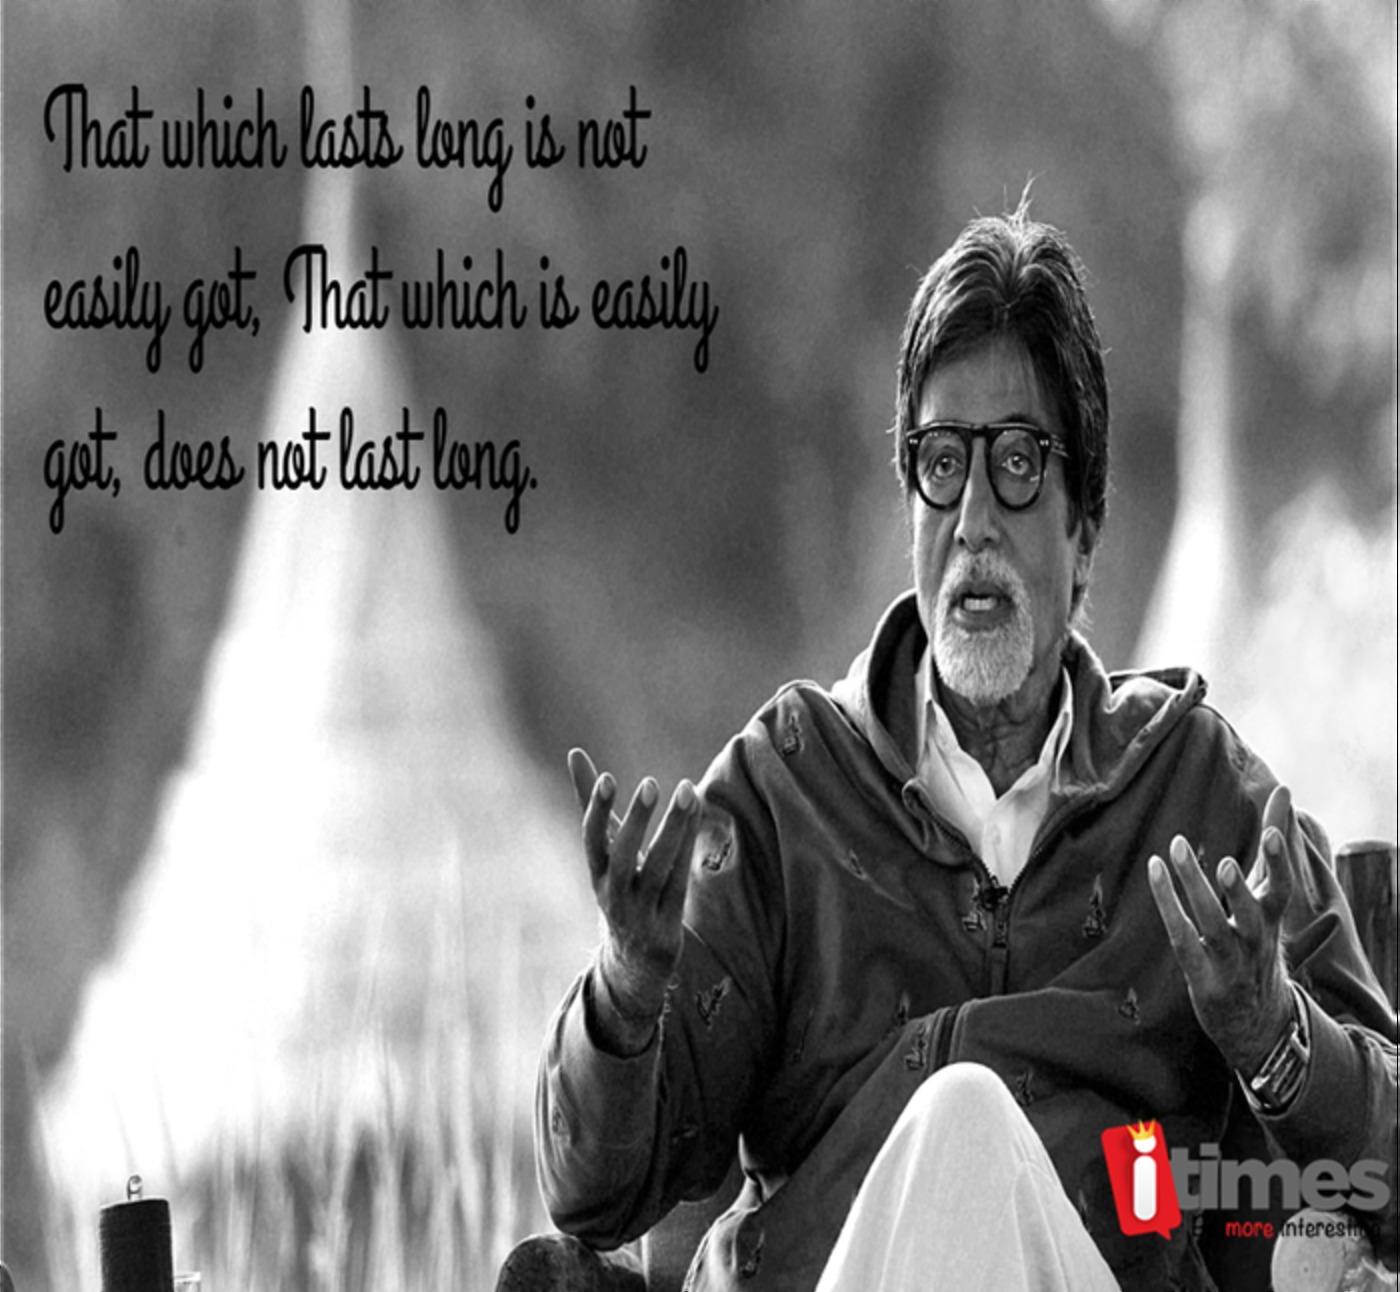 Inspirational Quotes Bollywood Celebrities On Their Life And Struggles Photos